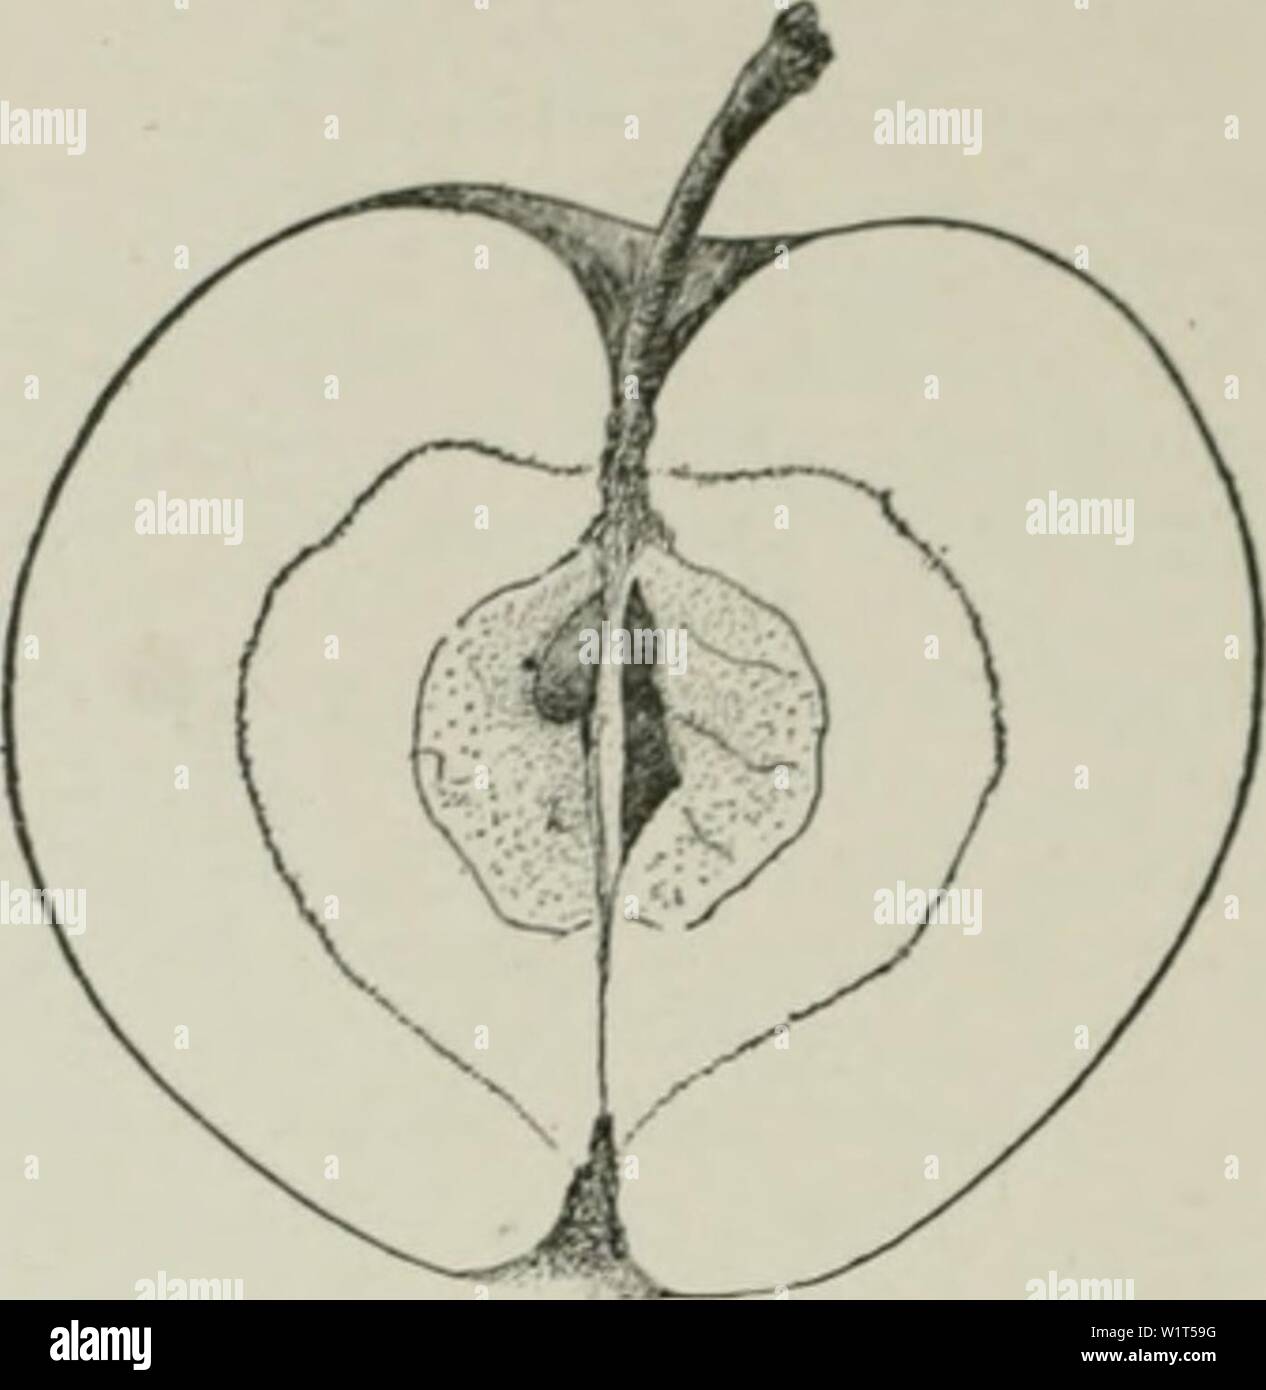 Archive image from page 93 of Cyclopedia of hardy fruits (1922). Cyclopedia of hardy fruits  cyclopediaofhar00hedr Year: 1922 64. Yellow Bellflower. {XV2) 65. Yellow Transparent. (X) veiy susceptible to injury by the apple-scab fungus. The apples do not stand storage well, and deteriorate quickly when brought from low temperatures. The trees are vigorous, healthy, hardy, long-lived, and productive in warm, well-drained, fertile soils. The variety has strong local attachments, and, though widely distributed, is now being planted in but few localities. The most suitable regions for its culture a Stock Photo